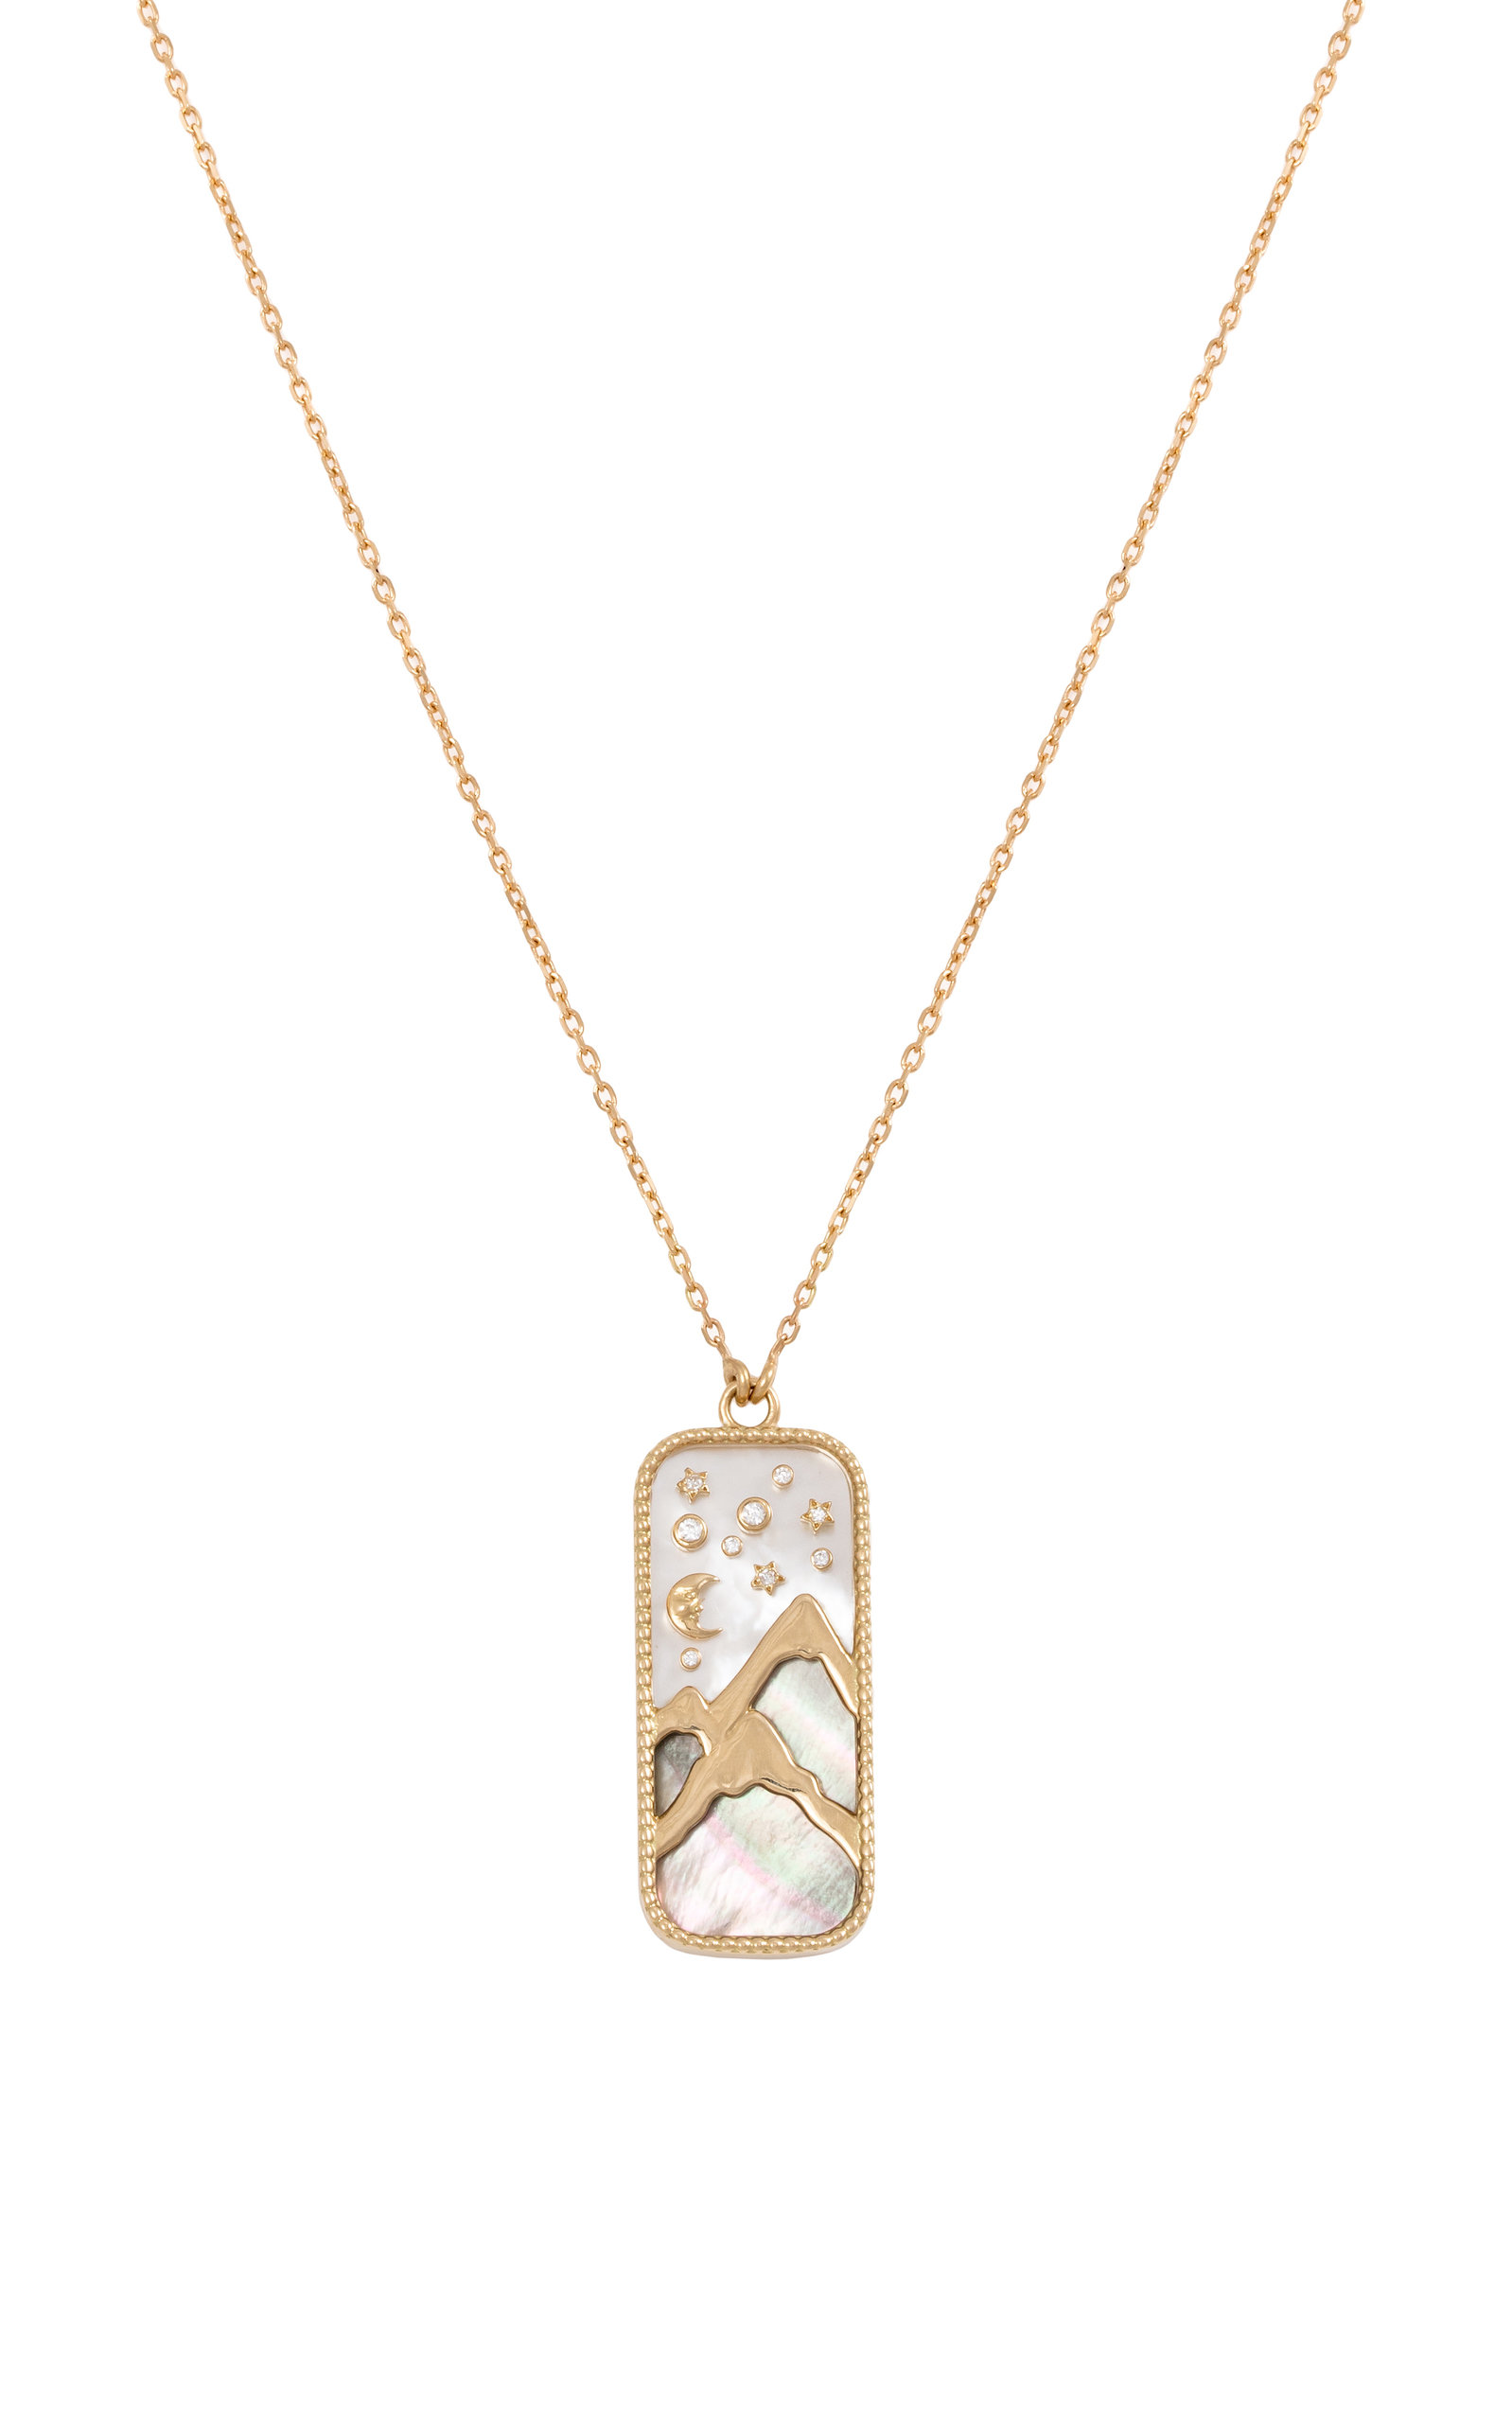 Elements of Love 18K Yellow Gold Earth Pendant Necklace